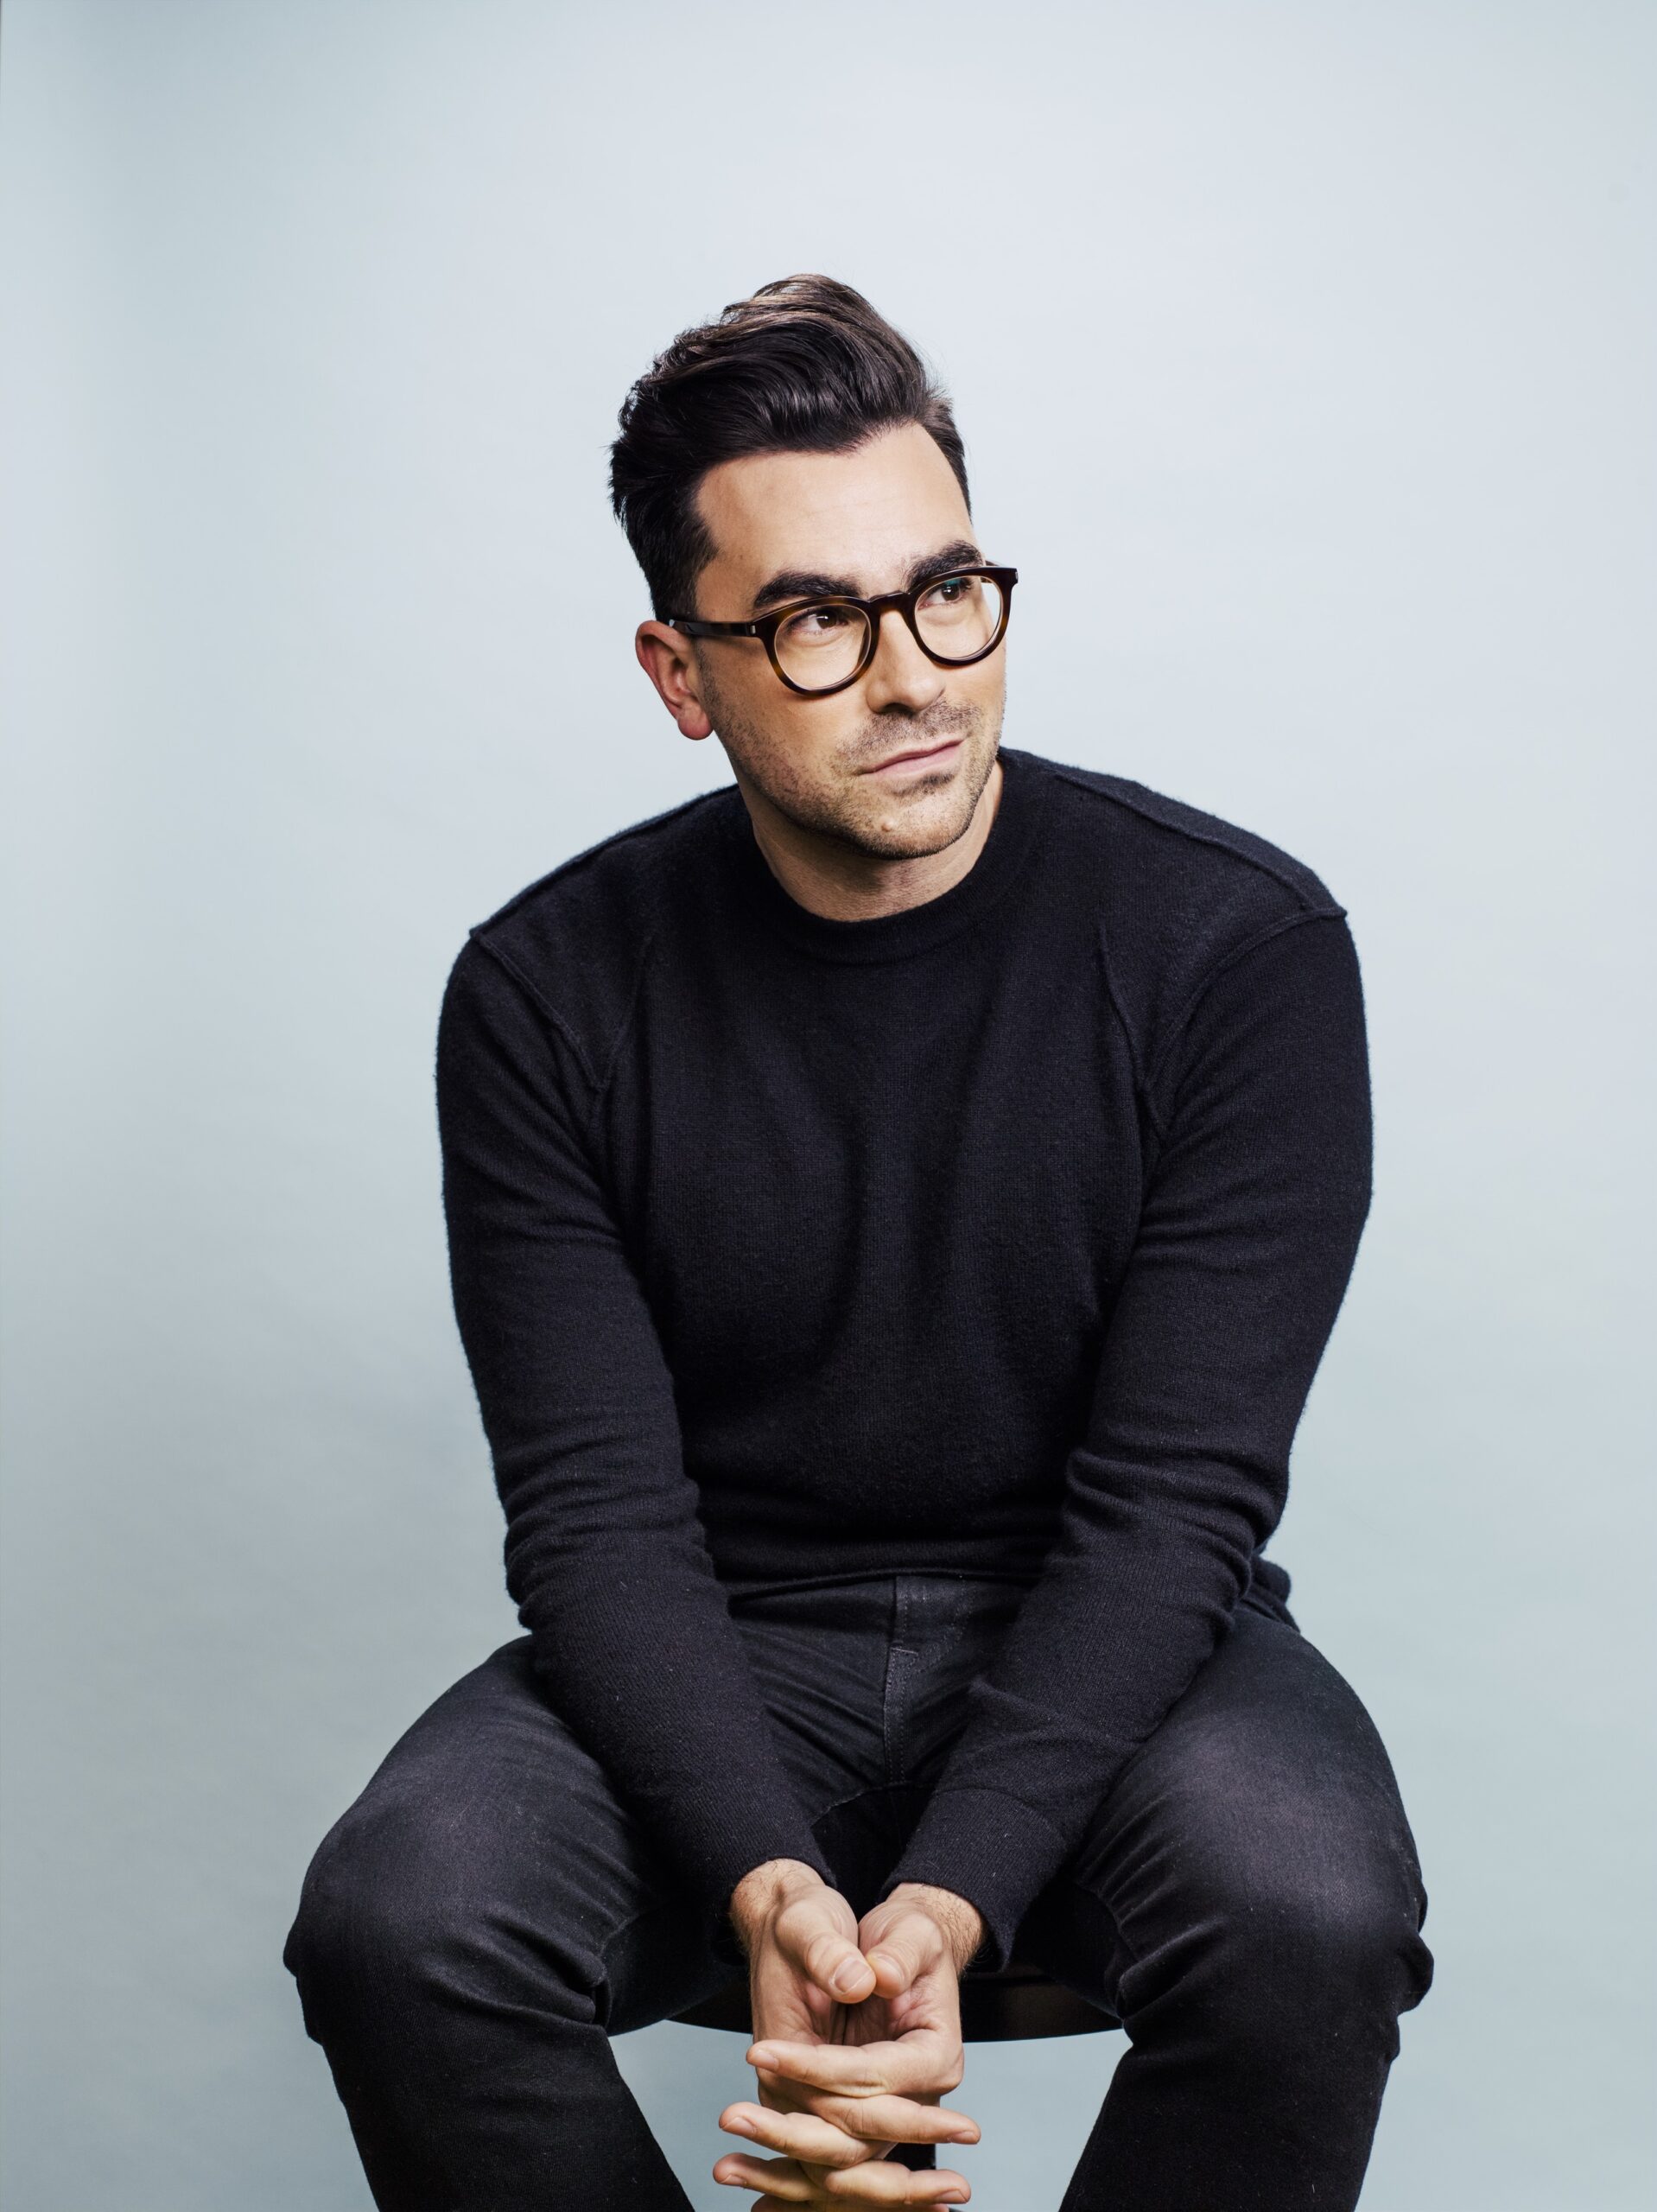 Dan Levy was honest and open when tackling tough questions from students.